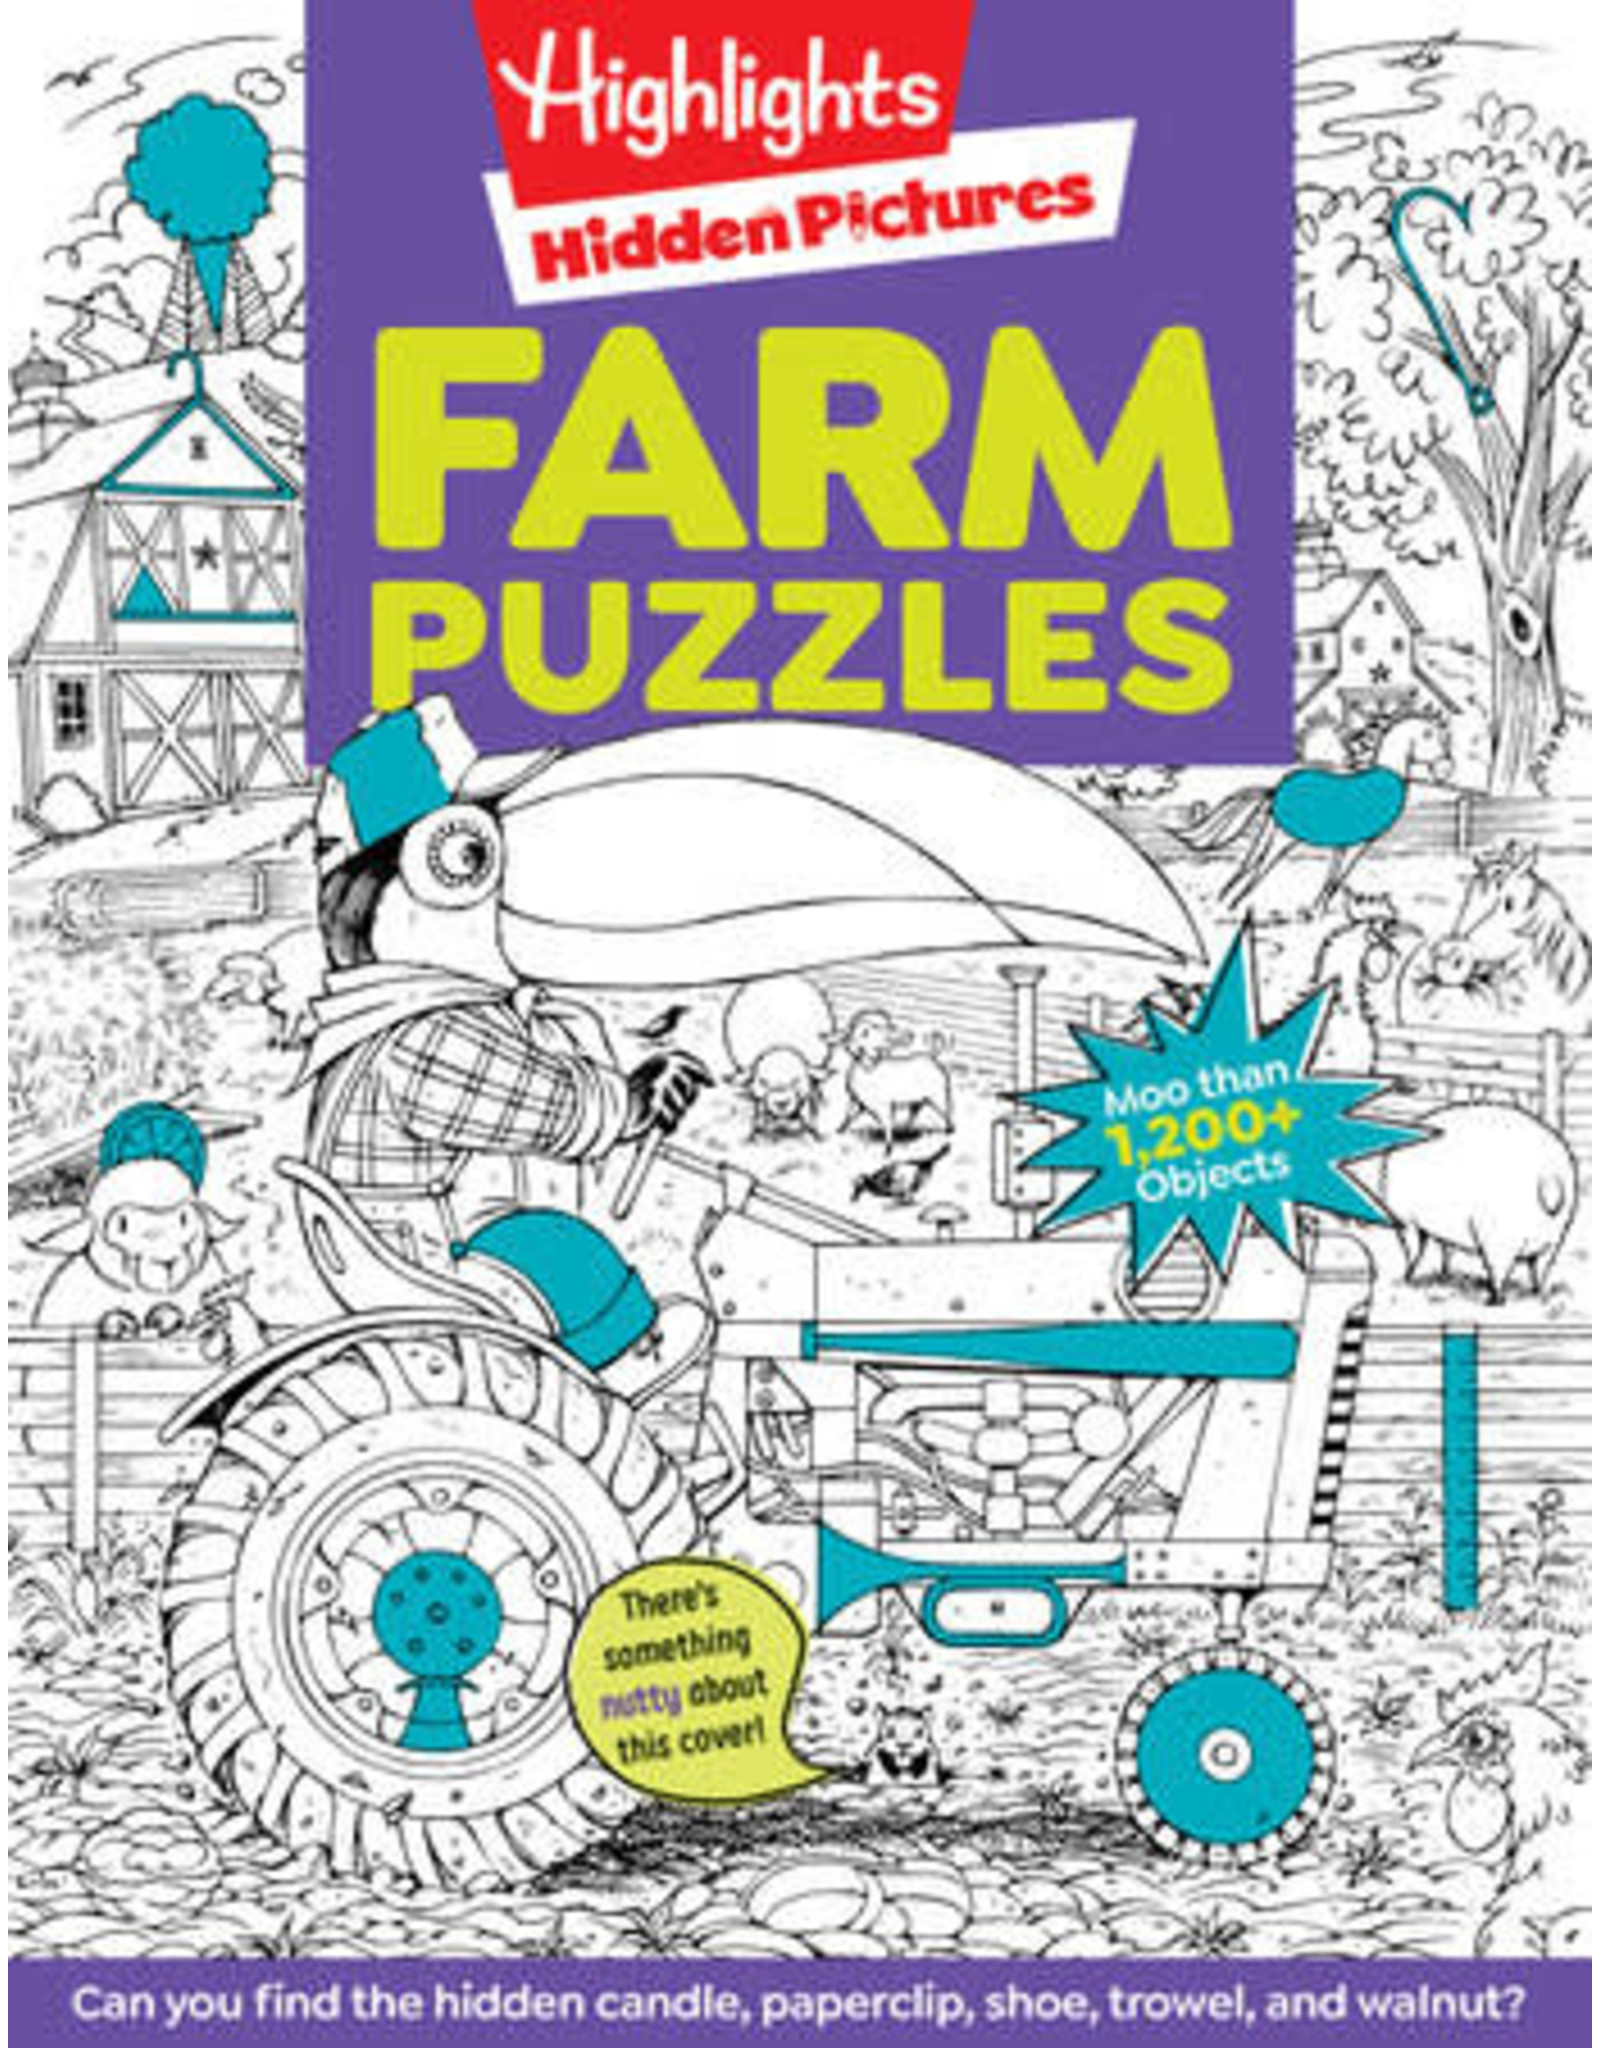 Highlights Farm Puzzles -  Activity Book - Highlights Hidden Pictures